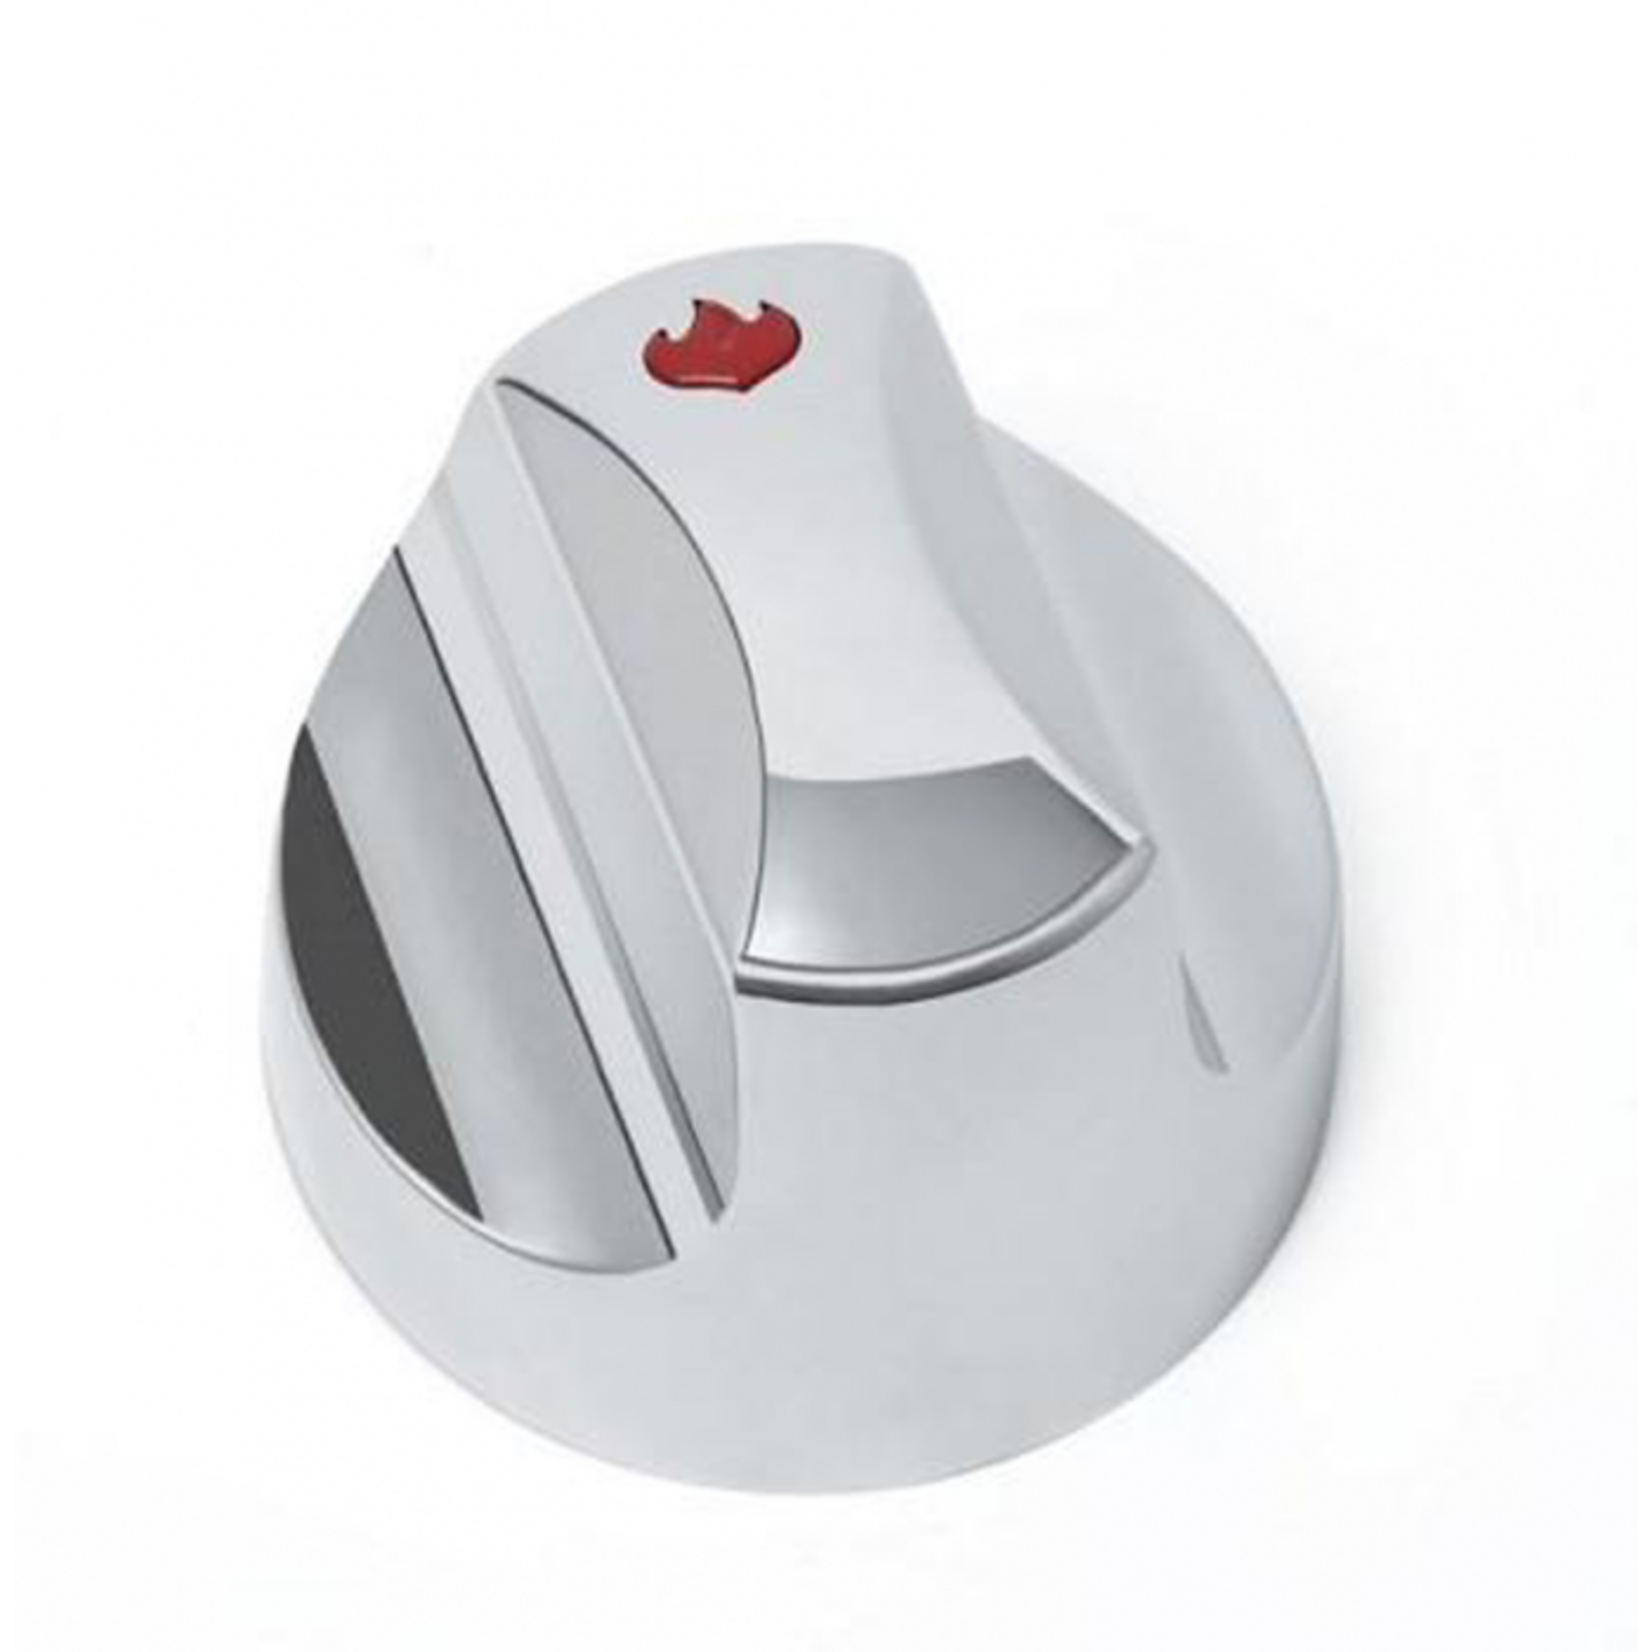 Napoleon Large Control Knob with Red Flame - Rogue